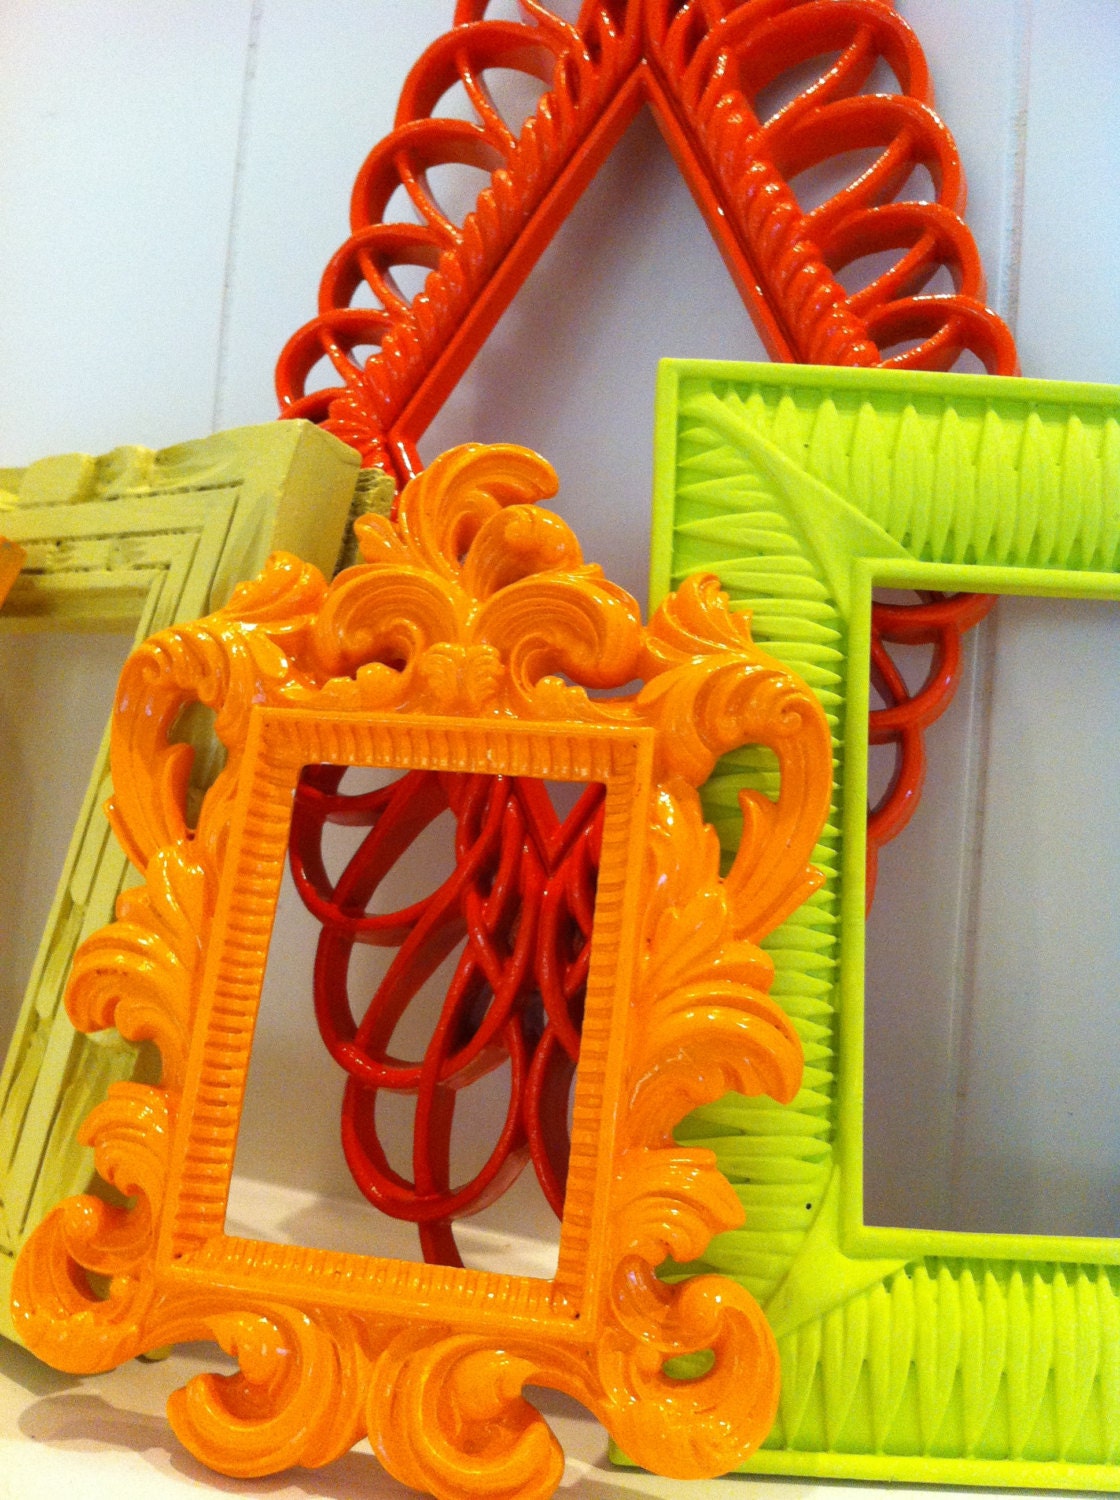 Empty Frame Collection Set, Bright and Chic, Upcycled Home Decor, Funky Vintage, Lime, Orange